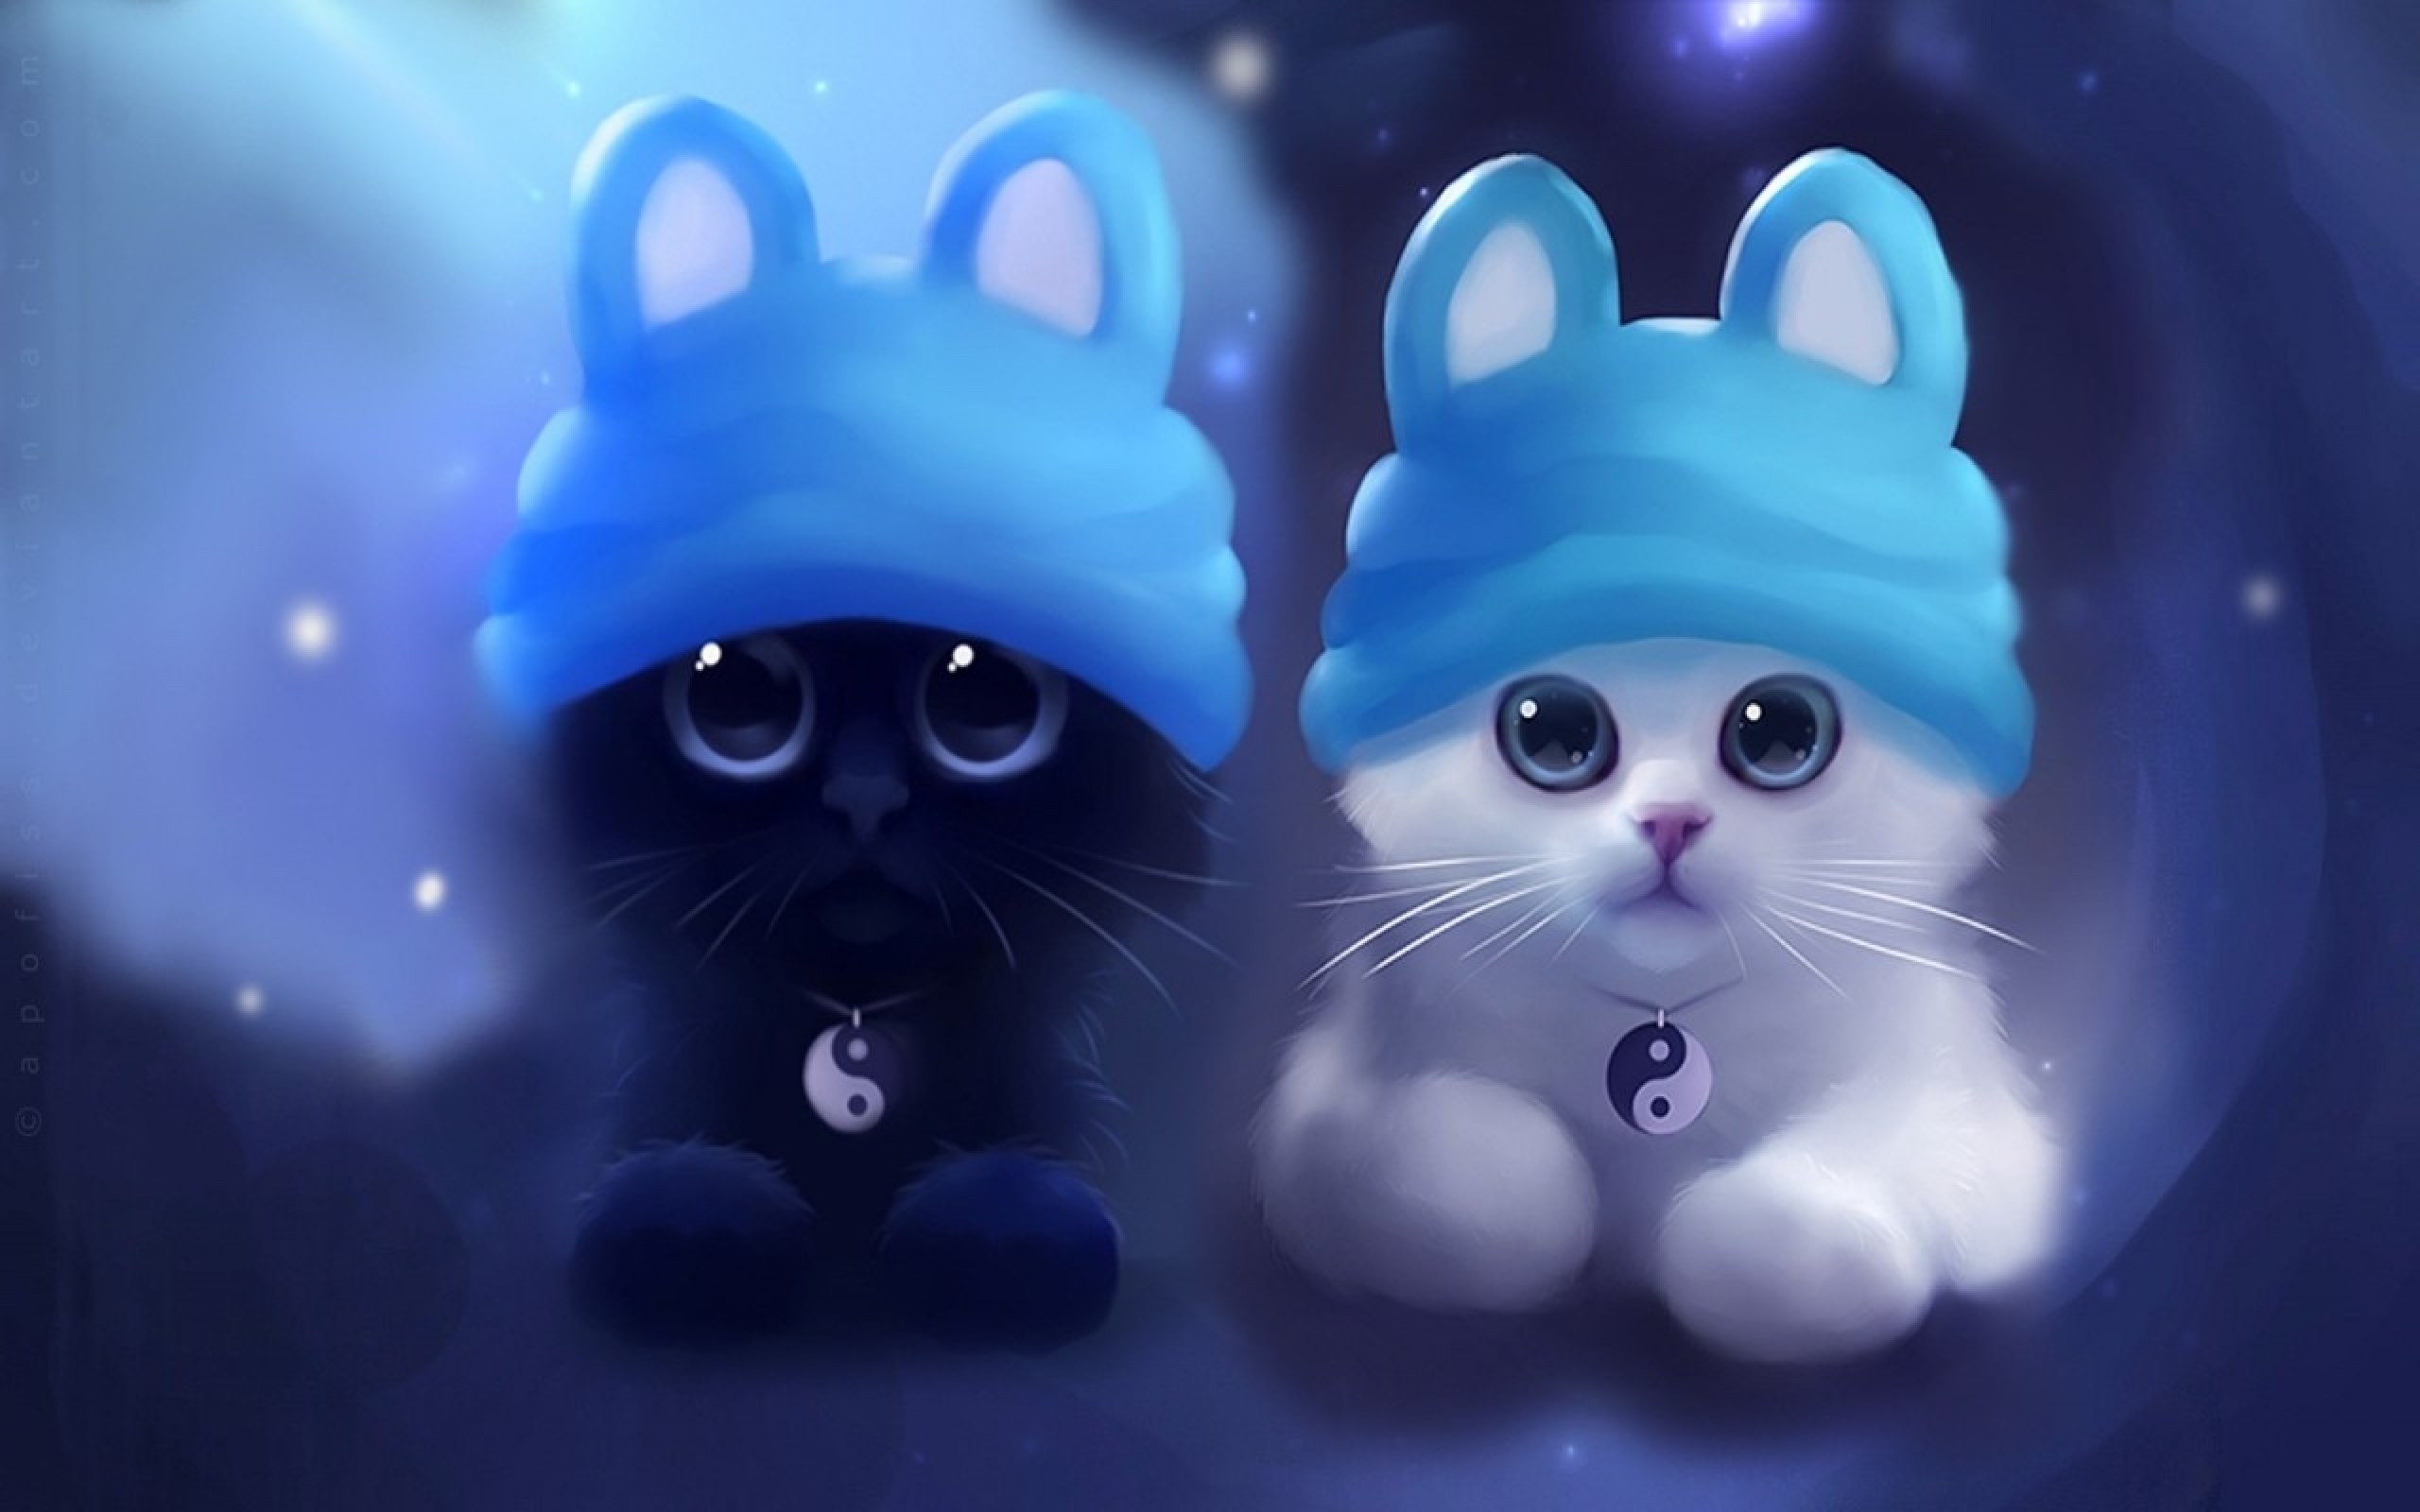 2560x1600 cute girly wallpapers for desktop background